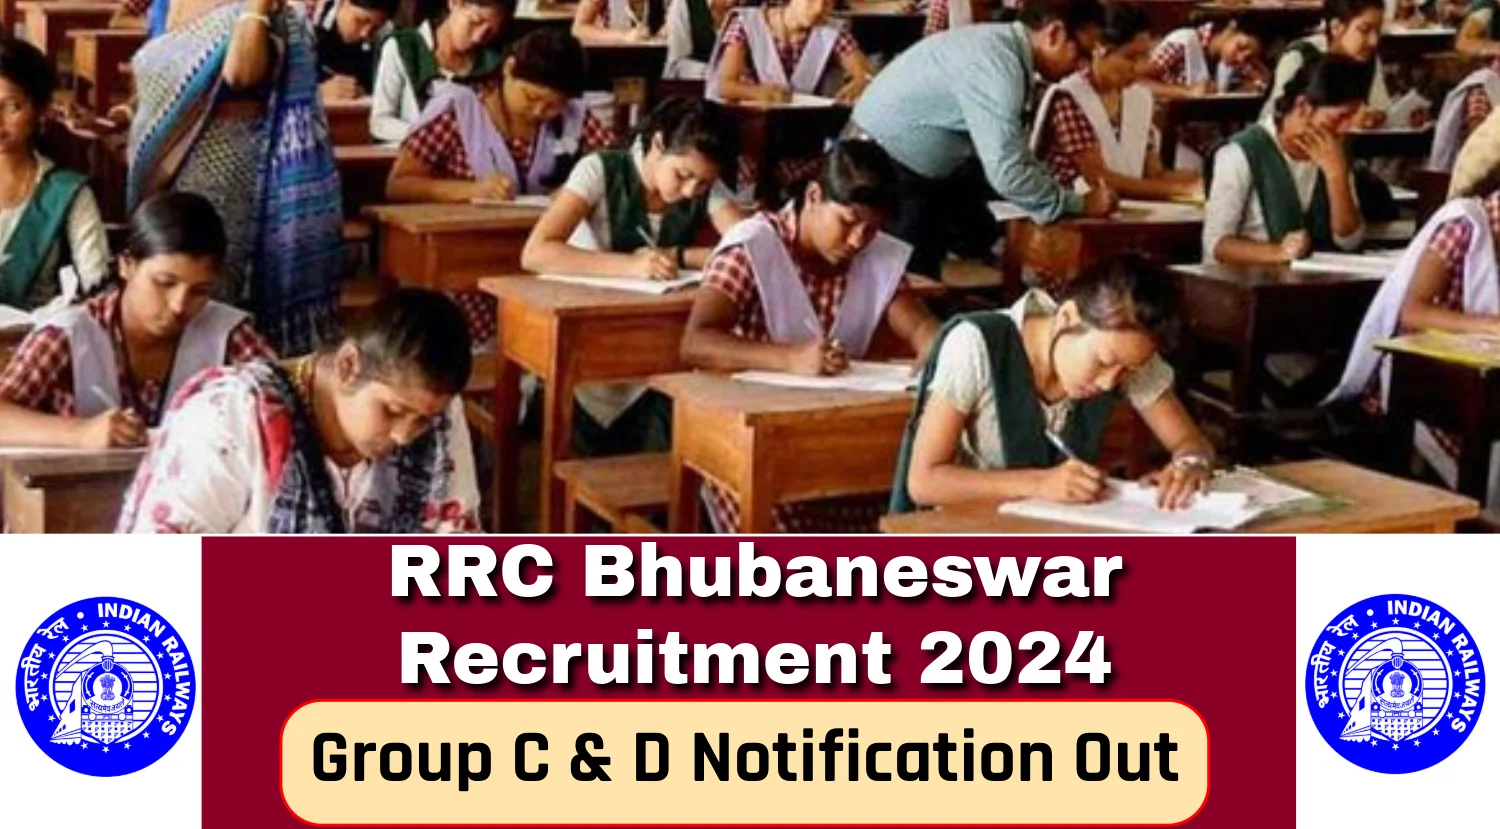 RRC Bhubaneswar Recruitment Notification 2024 Out for Various Group C and D Posts, Apply Now Under East Coast Railway